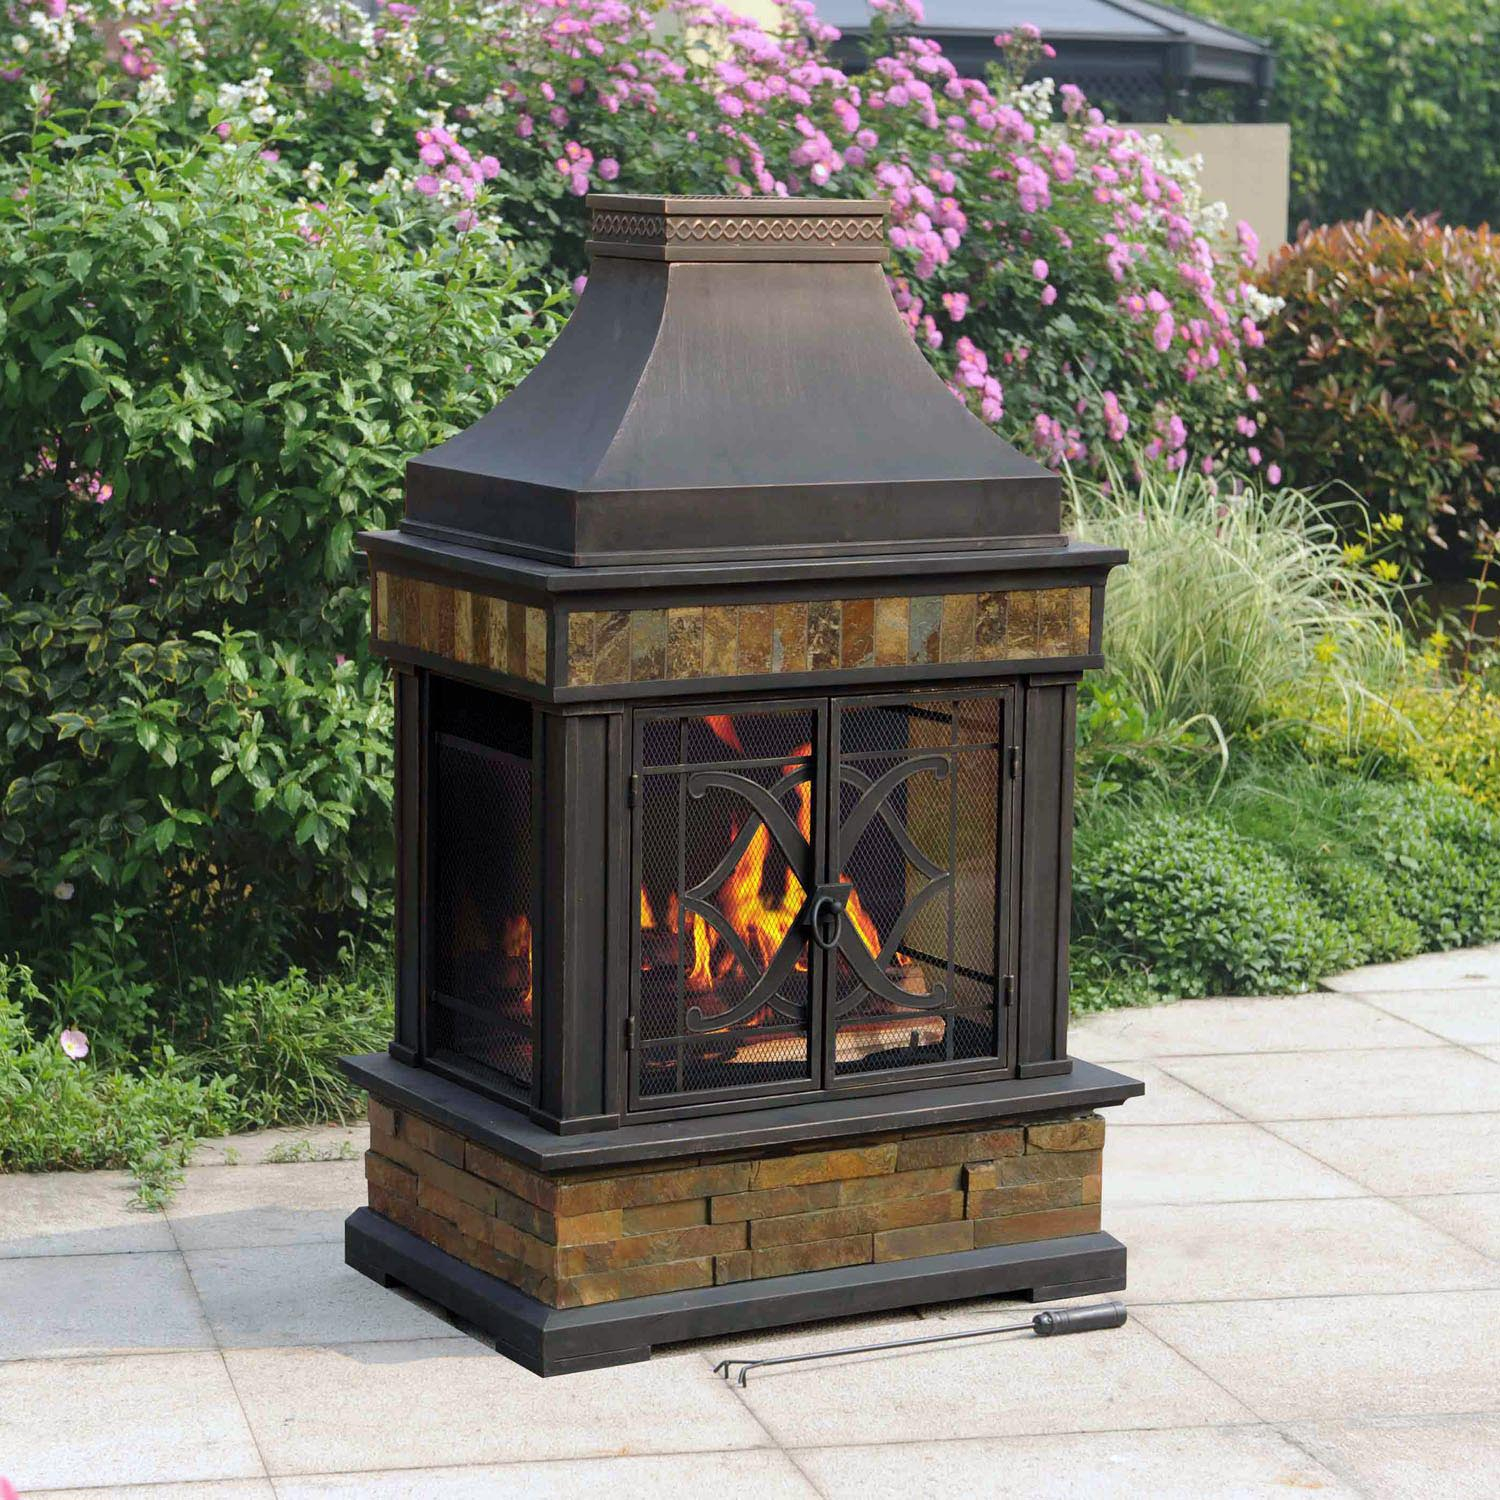 Outdoor Fire Pit Chimney Hood Fire Pit Design Ideas intended for proportions 1500 X 1500